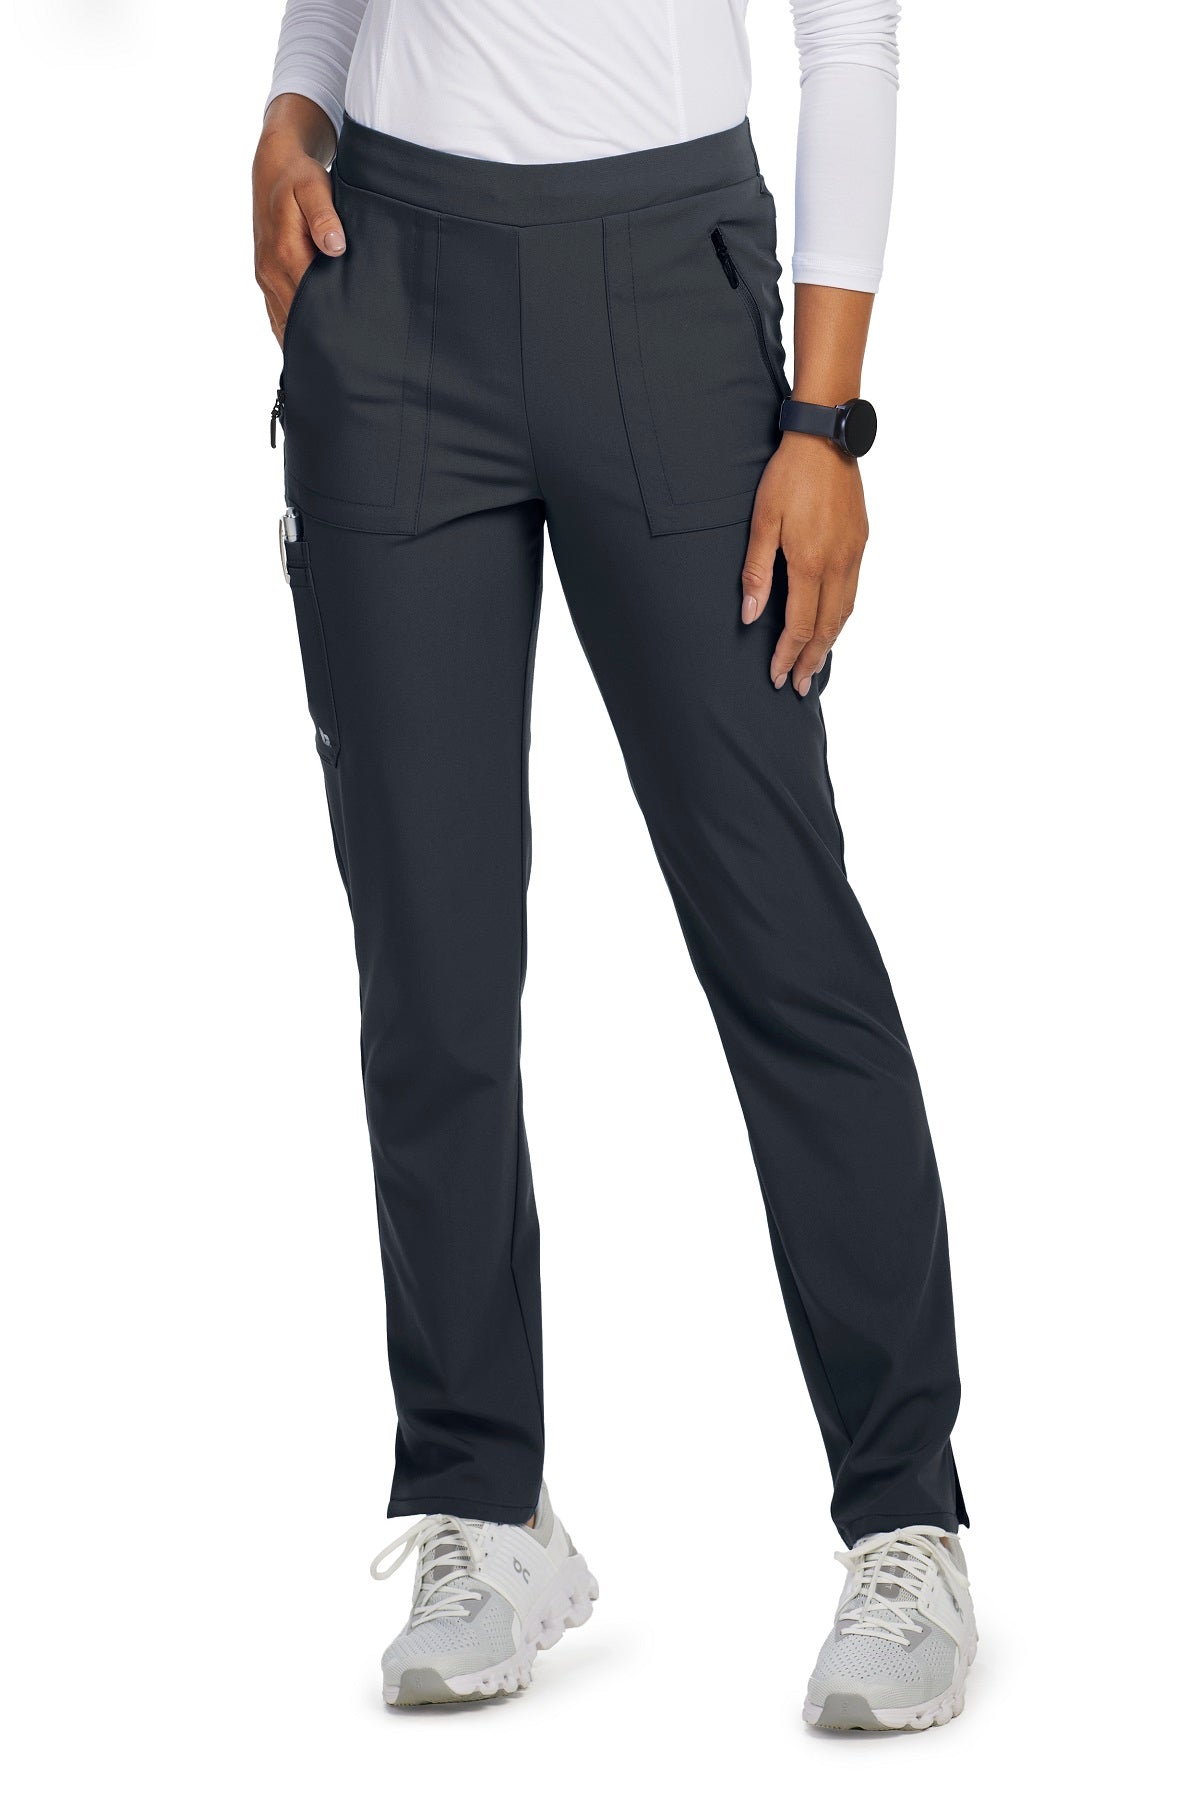 Barco Unify Petite Scrub Pants Purpose 5 Pocket in Steel at Parker's Clothing and Shoes.